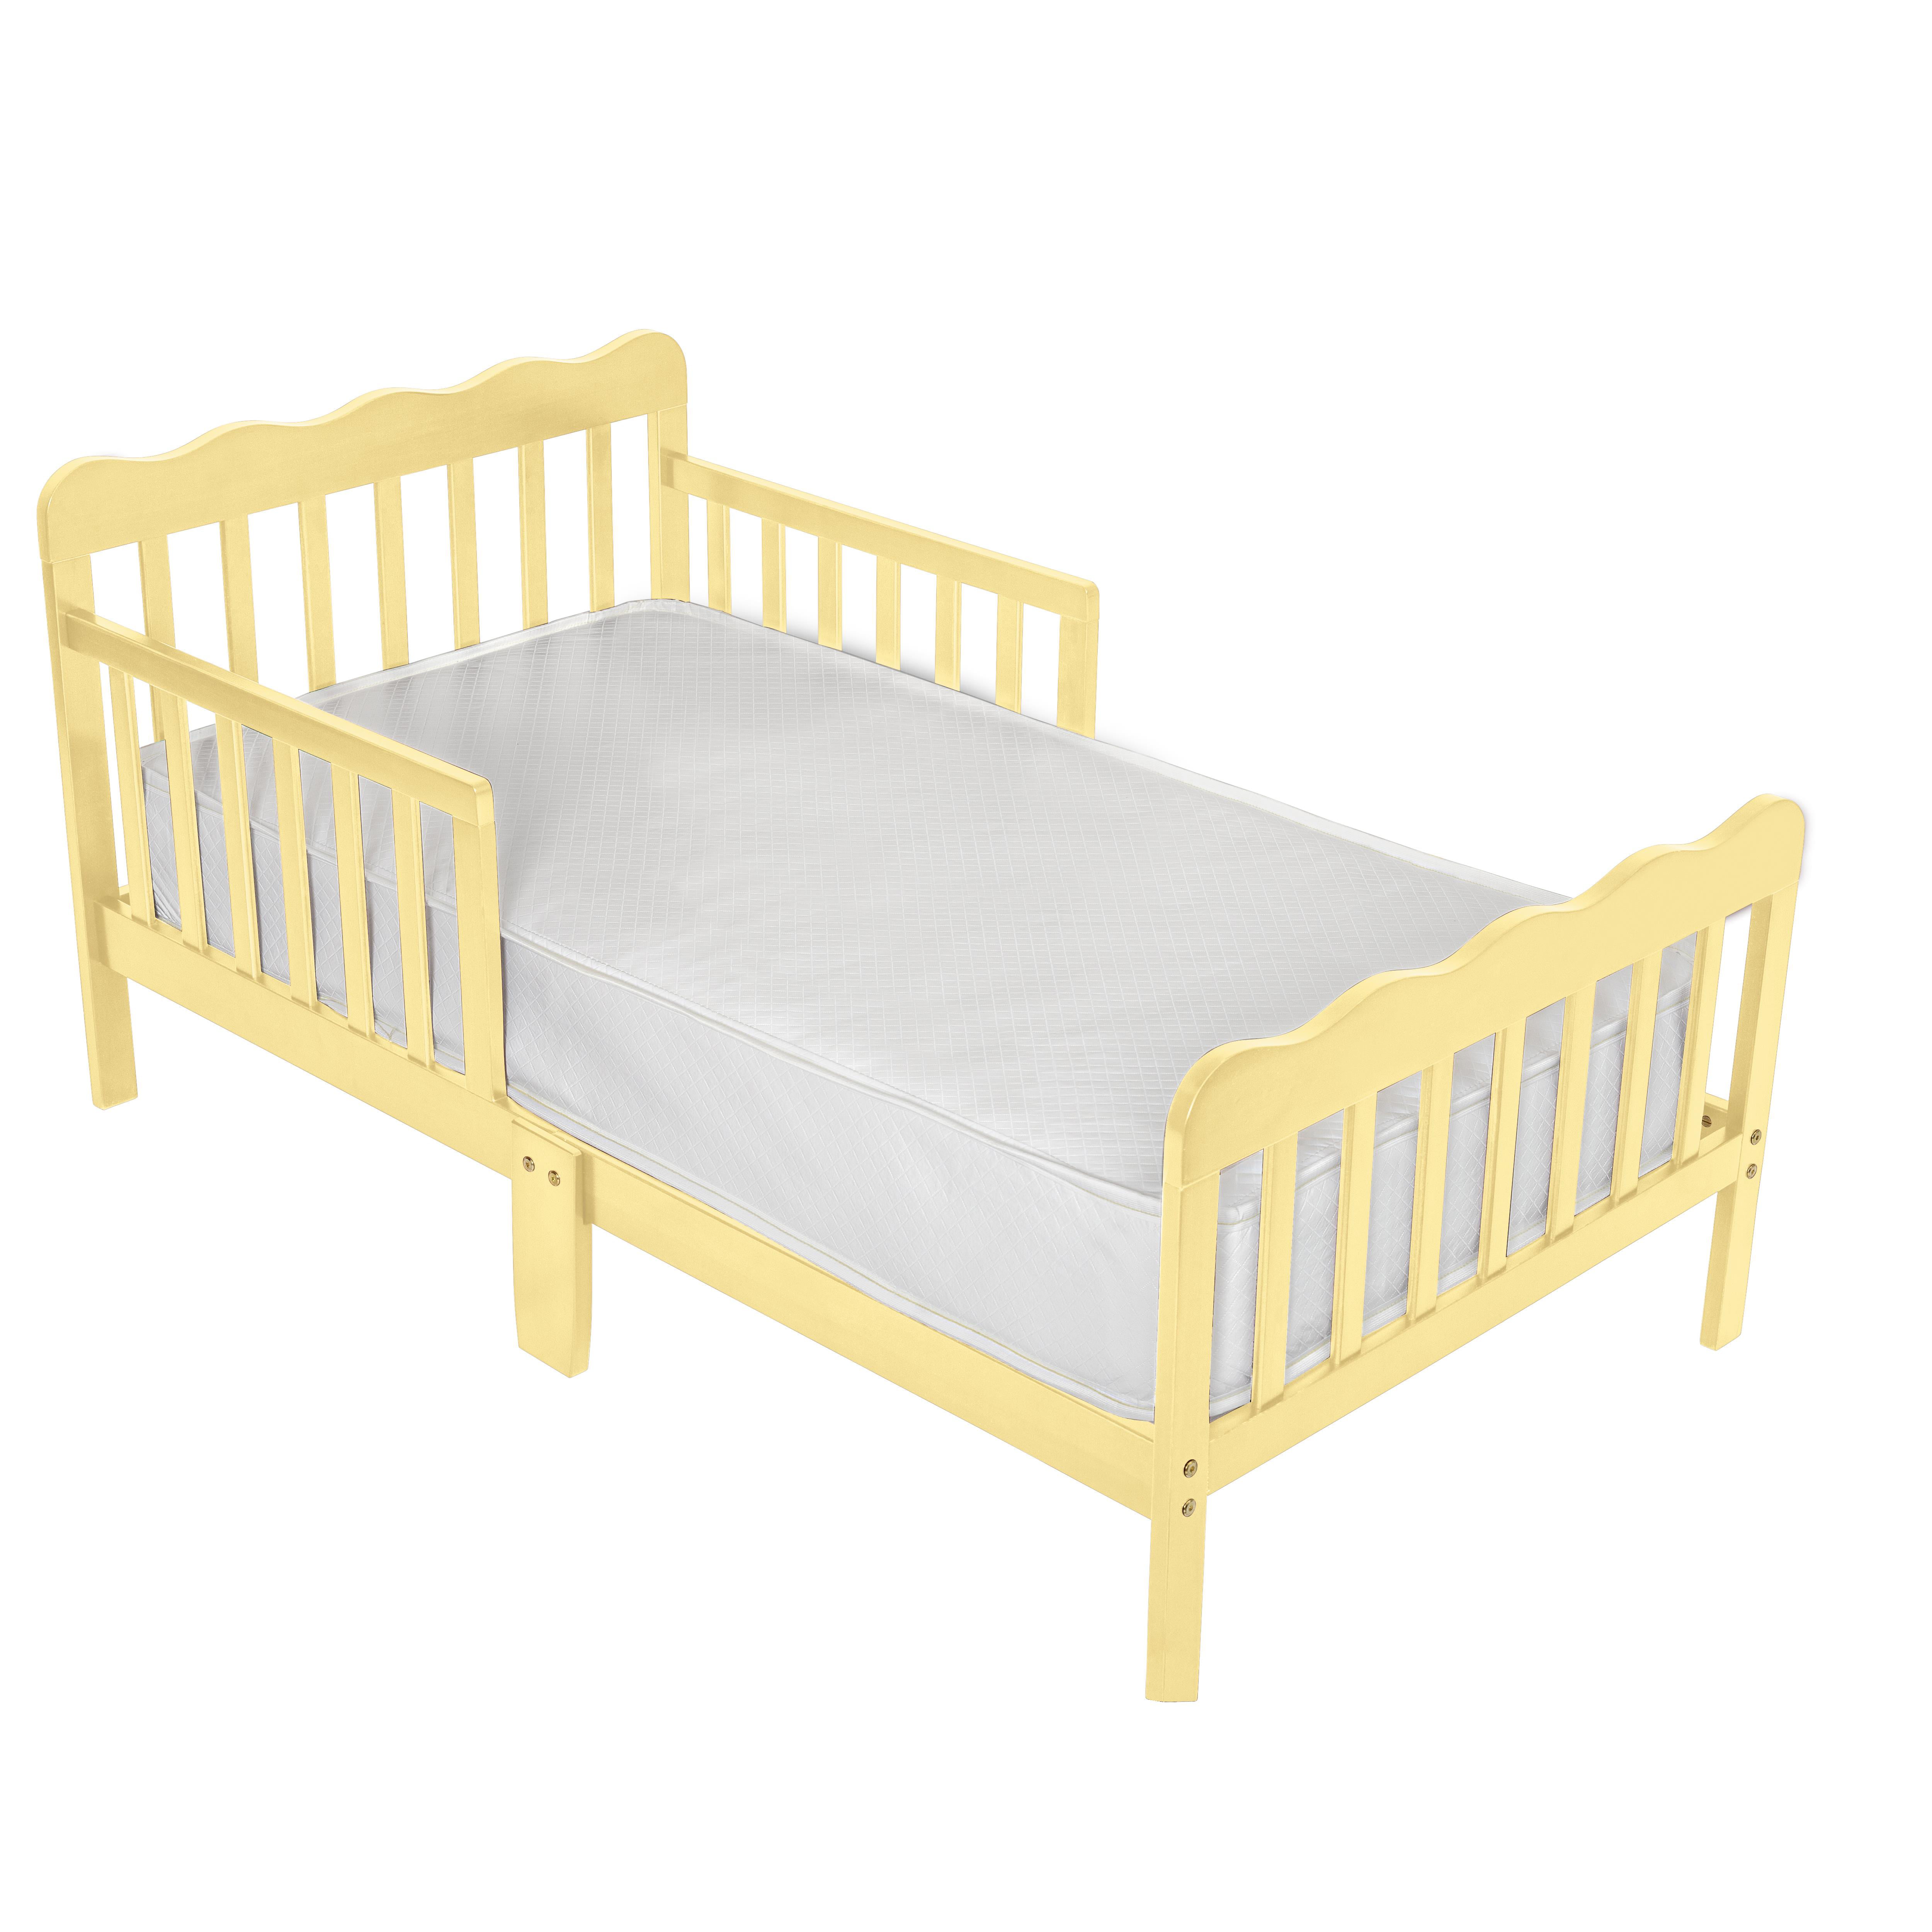 Sturdy Wooden Frame for Extra Safety White for Kids Boys & Girls Children Sleeping Bedroom Furniture Two Side Safety Guardrails & Wooden Slat Support OCDAY Toddler & Kids Bed